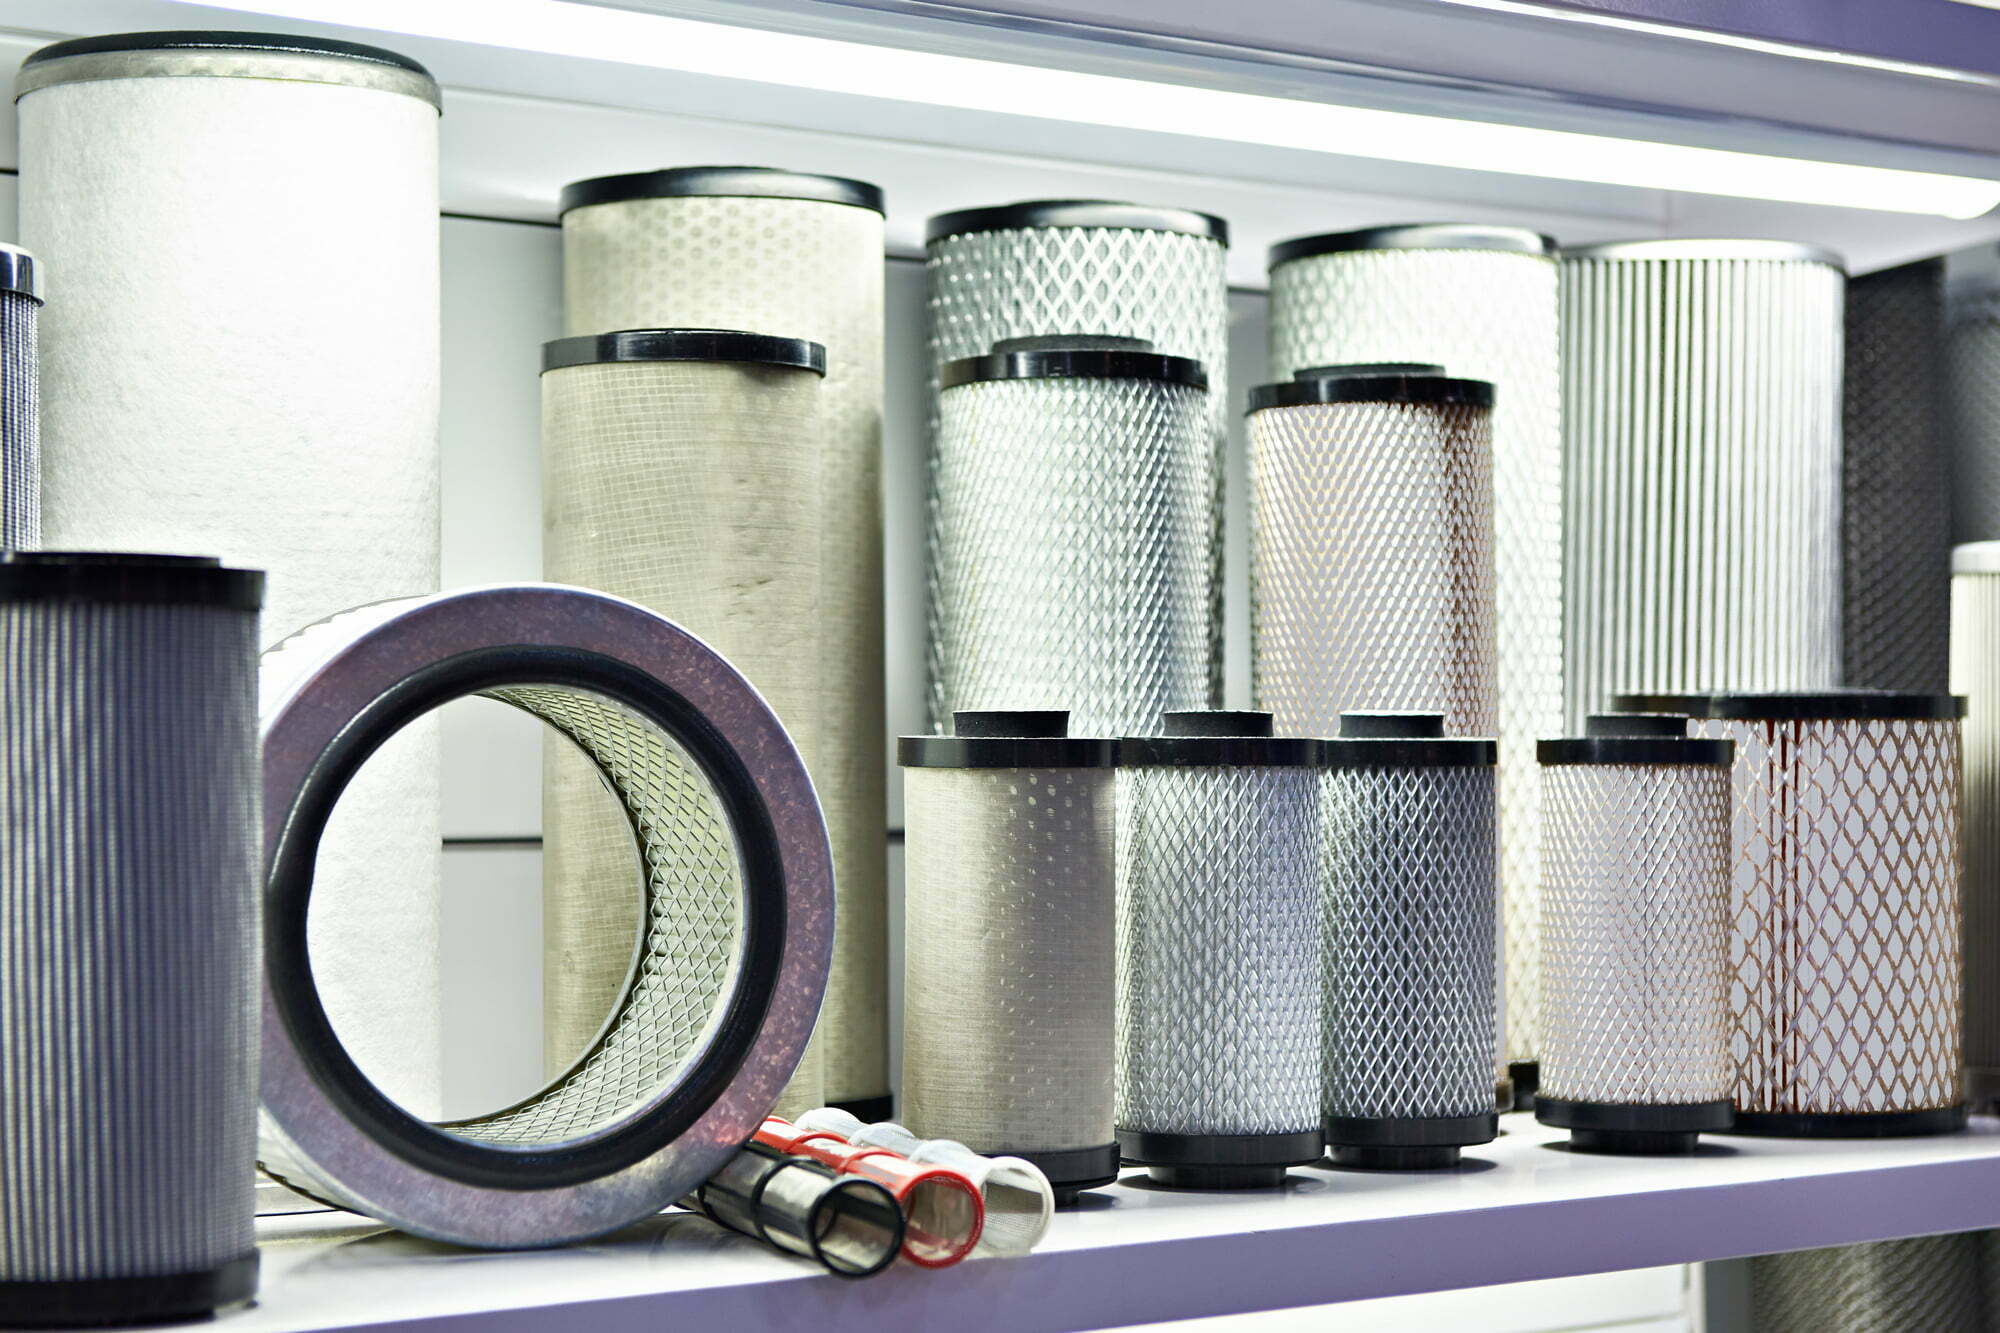 Mospart | The Role of the Oil Filter in Protecting Your Engine’s Performance